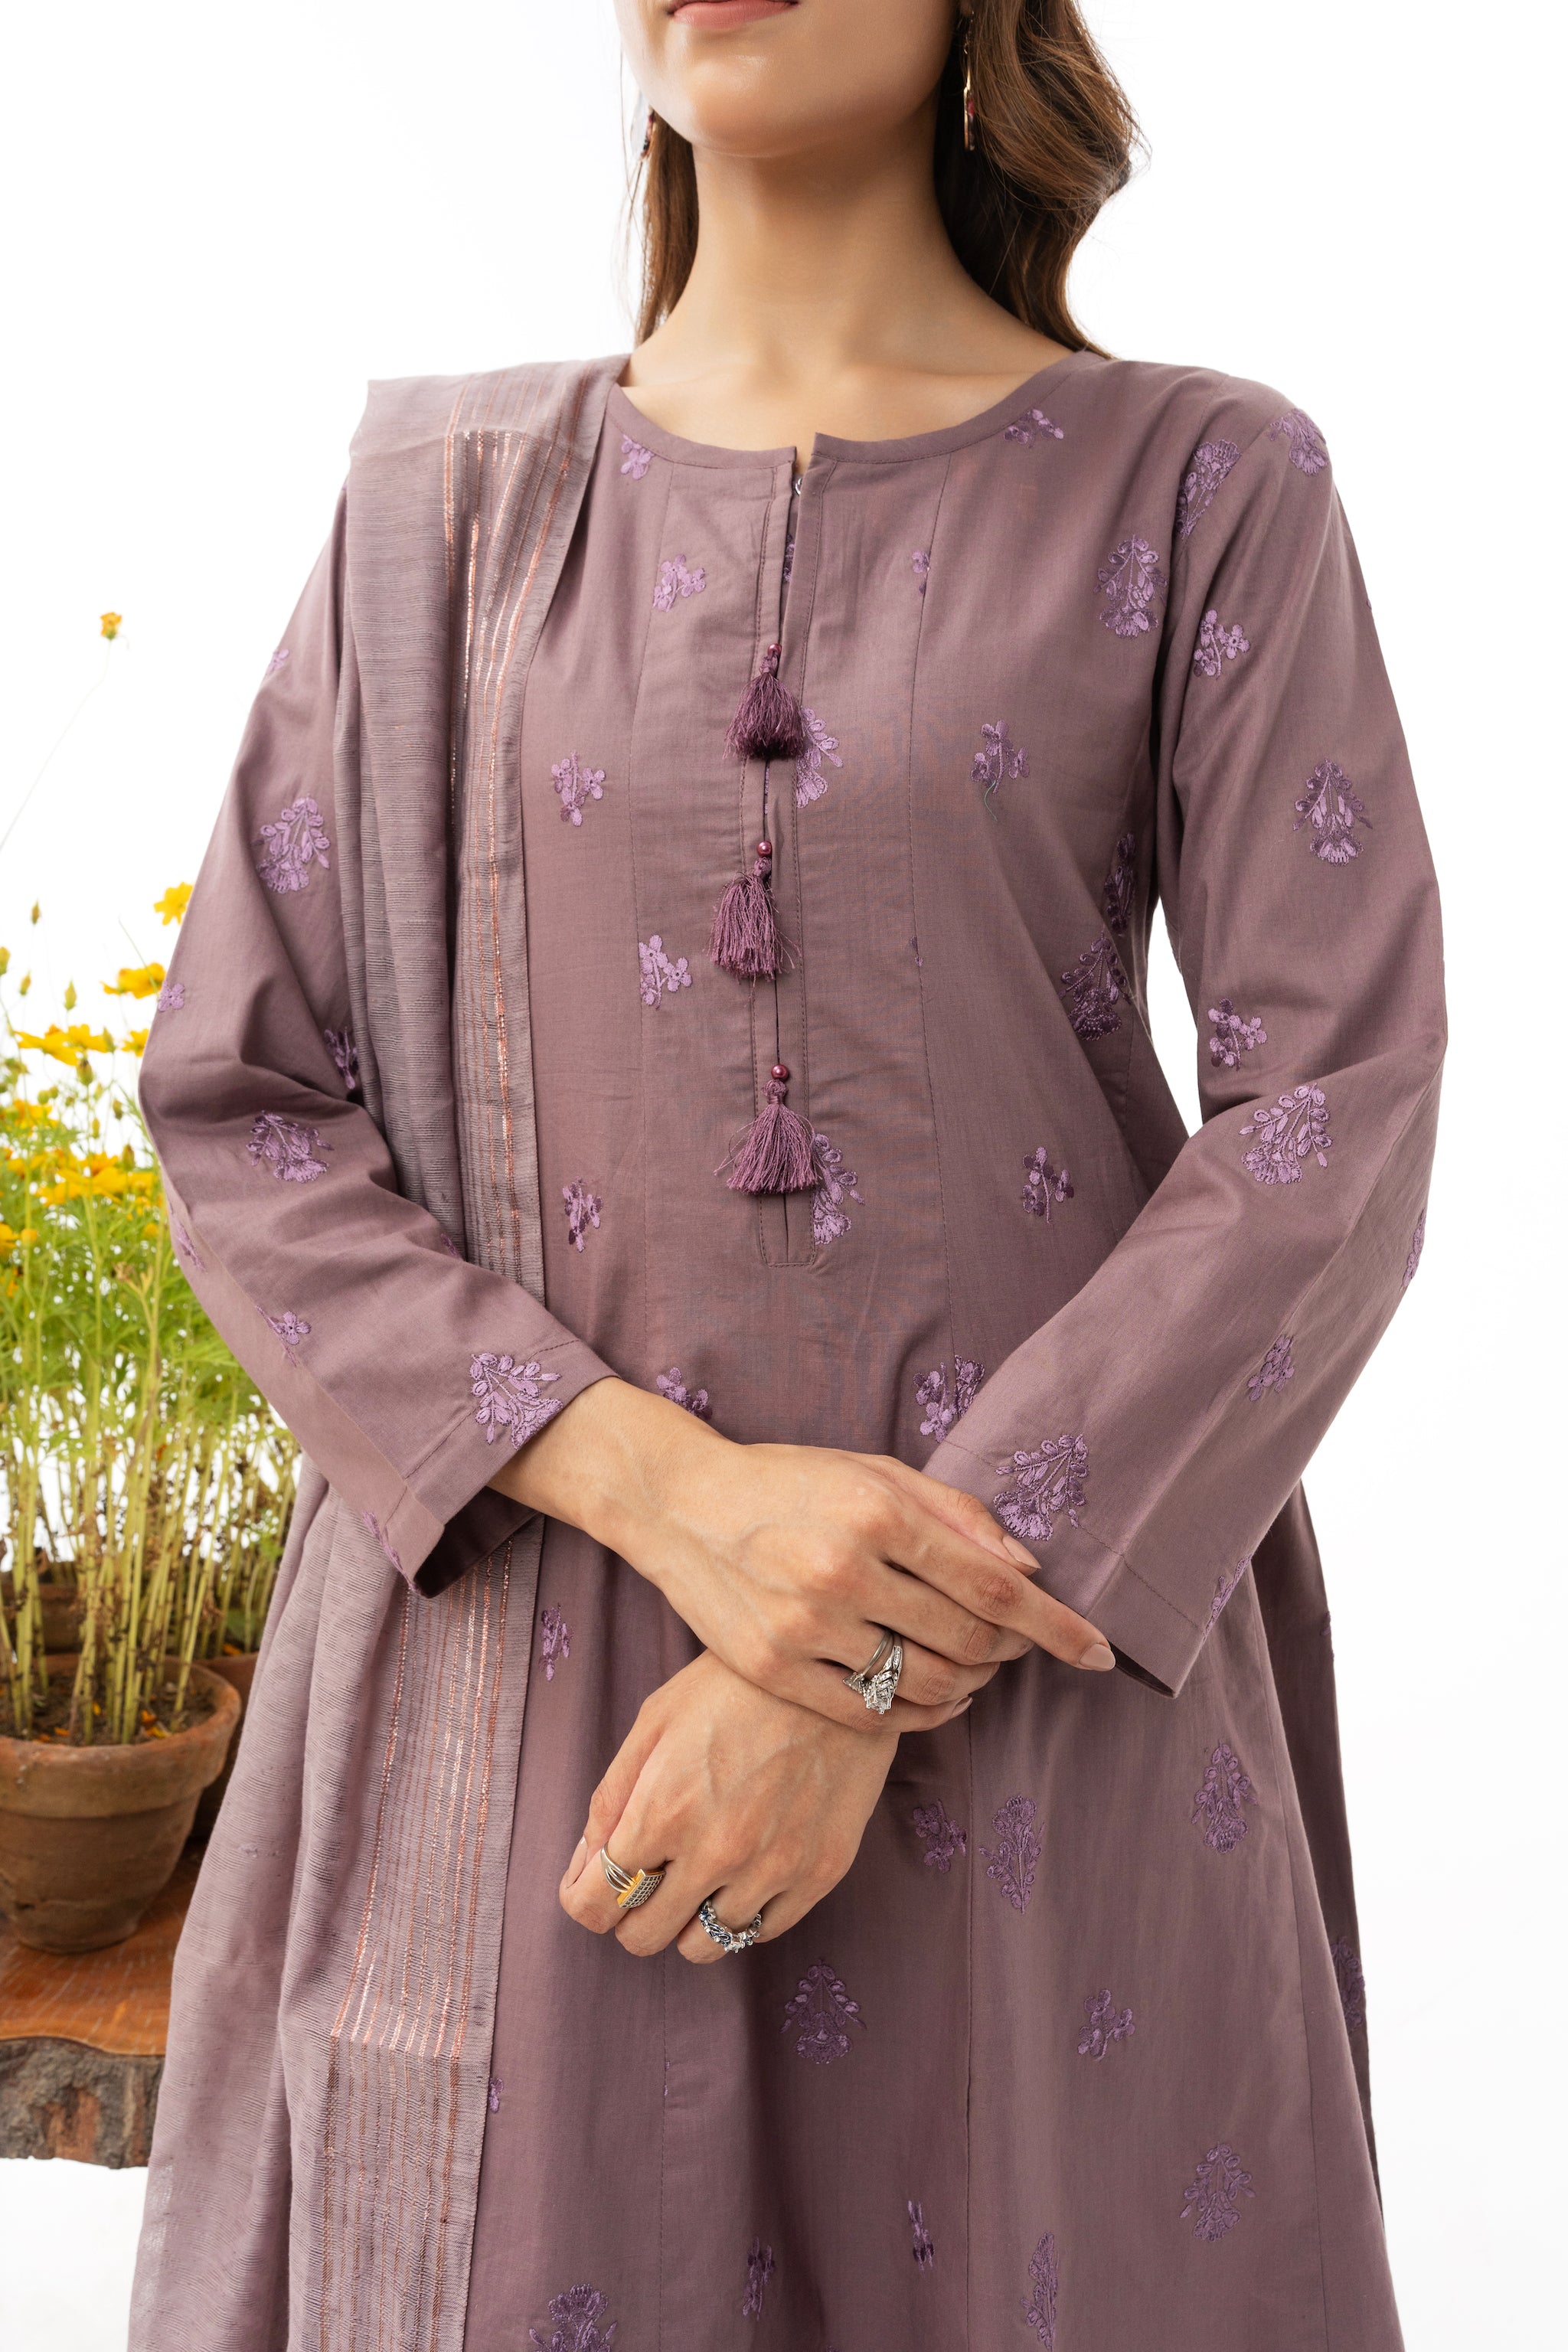 3 PIECE - EMBROIDERED COTTON SUIT BY ARFA RIWAJ SUMMER 2023